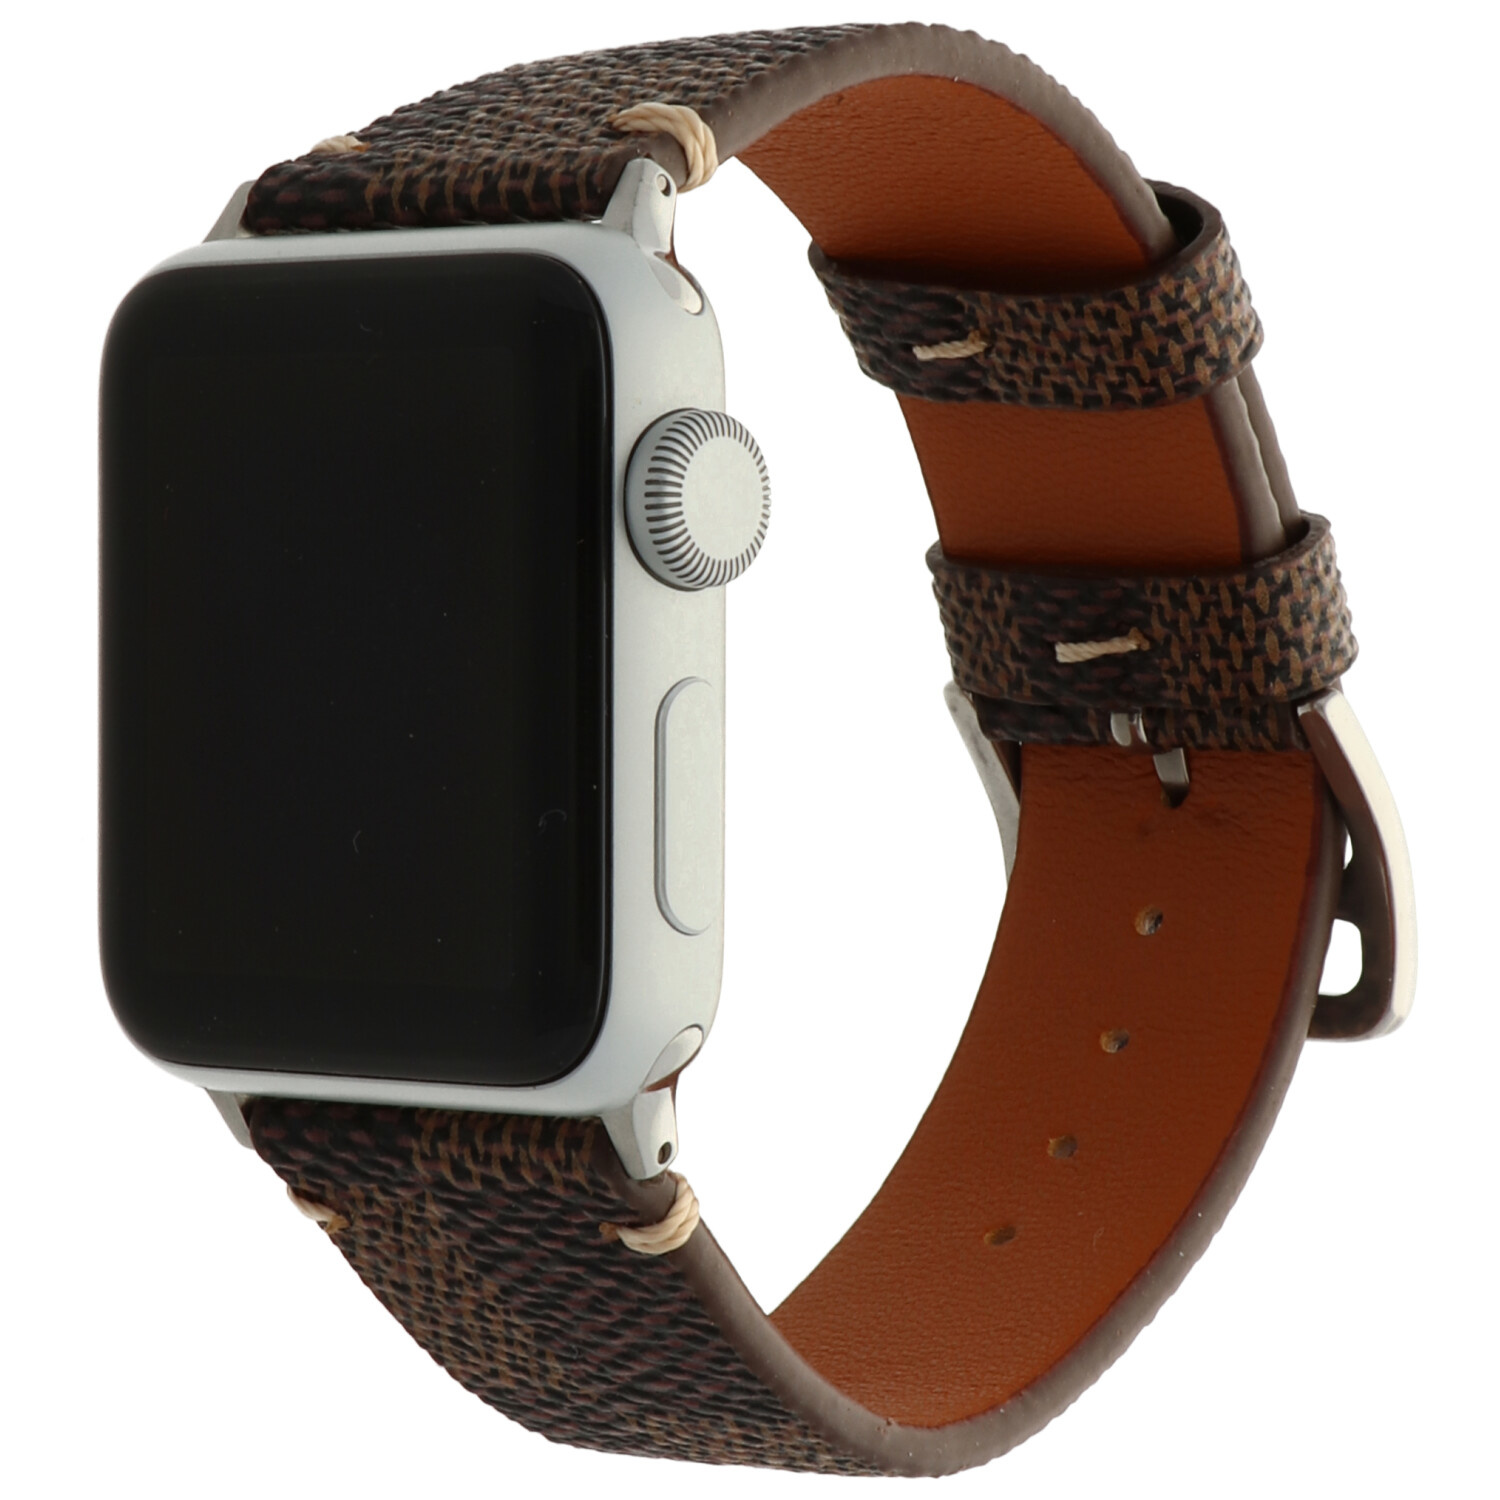 Apple Watch Leather Grid Strap - Brown